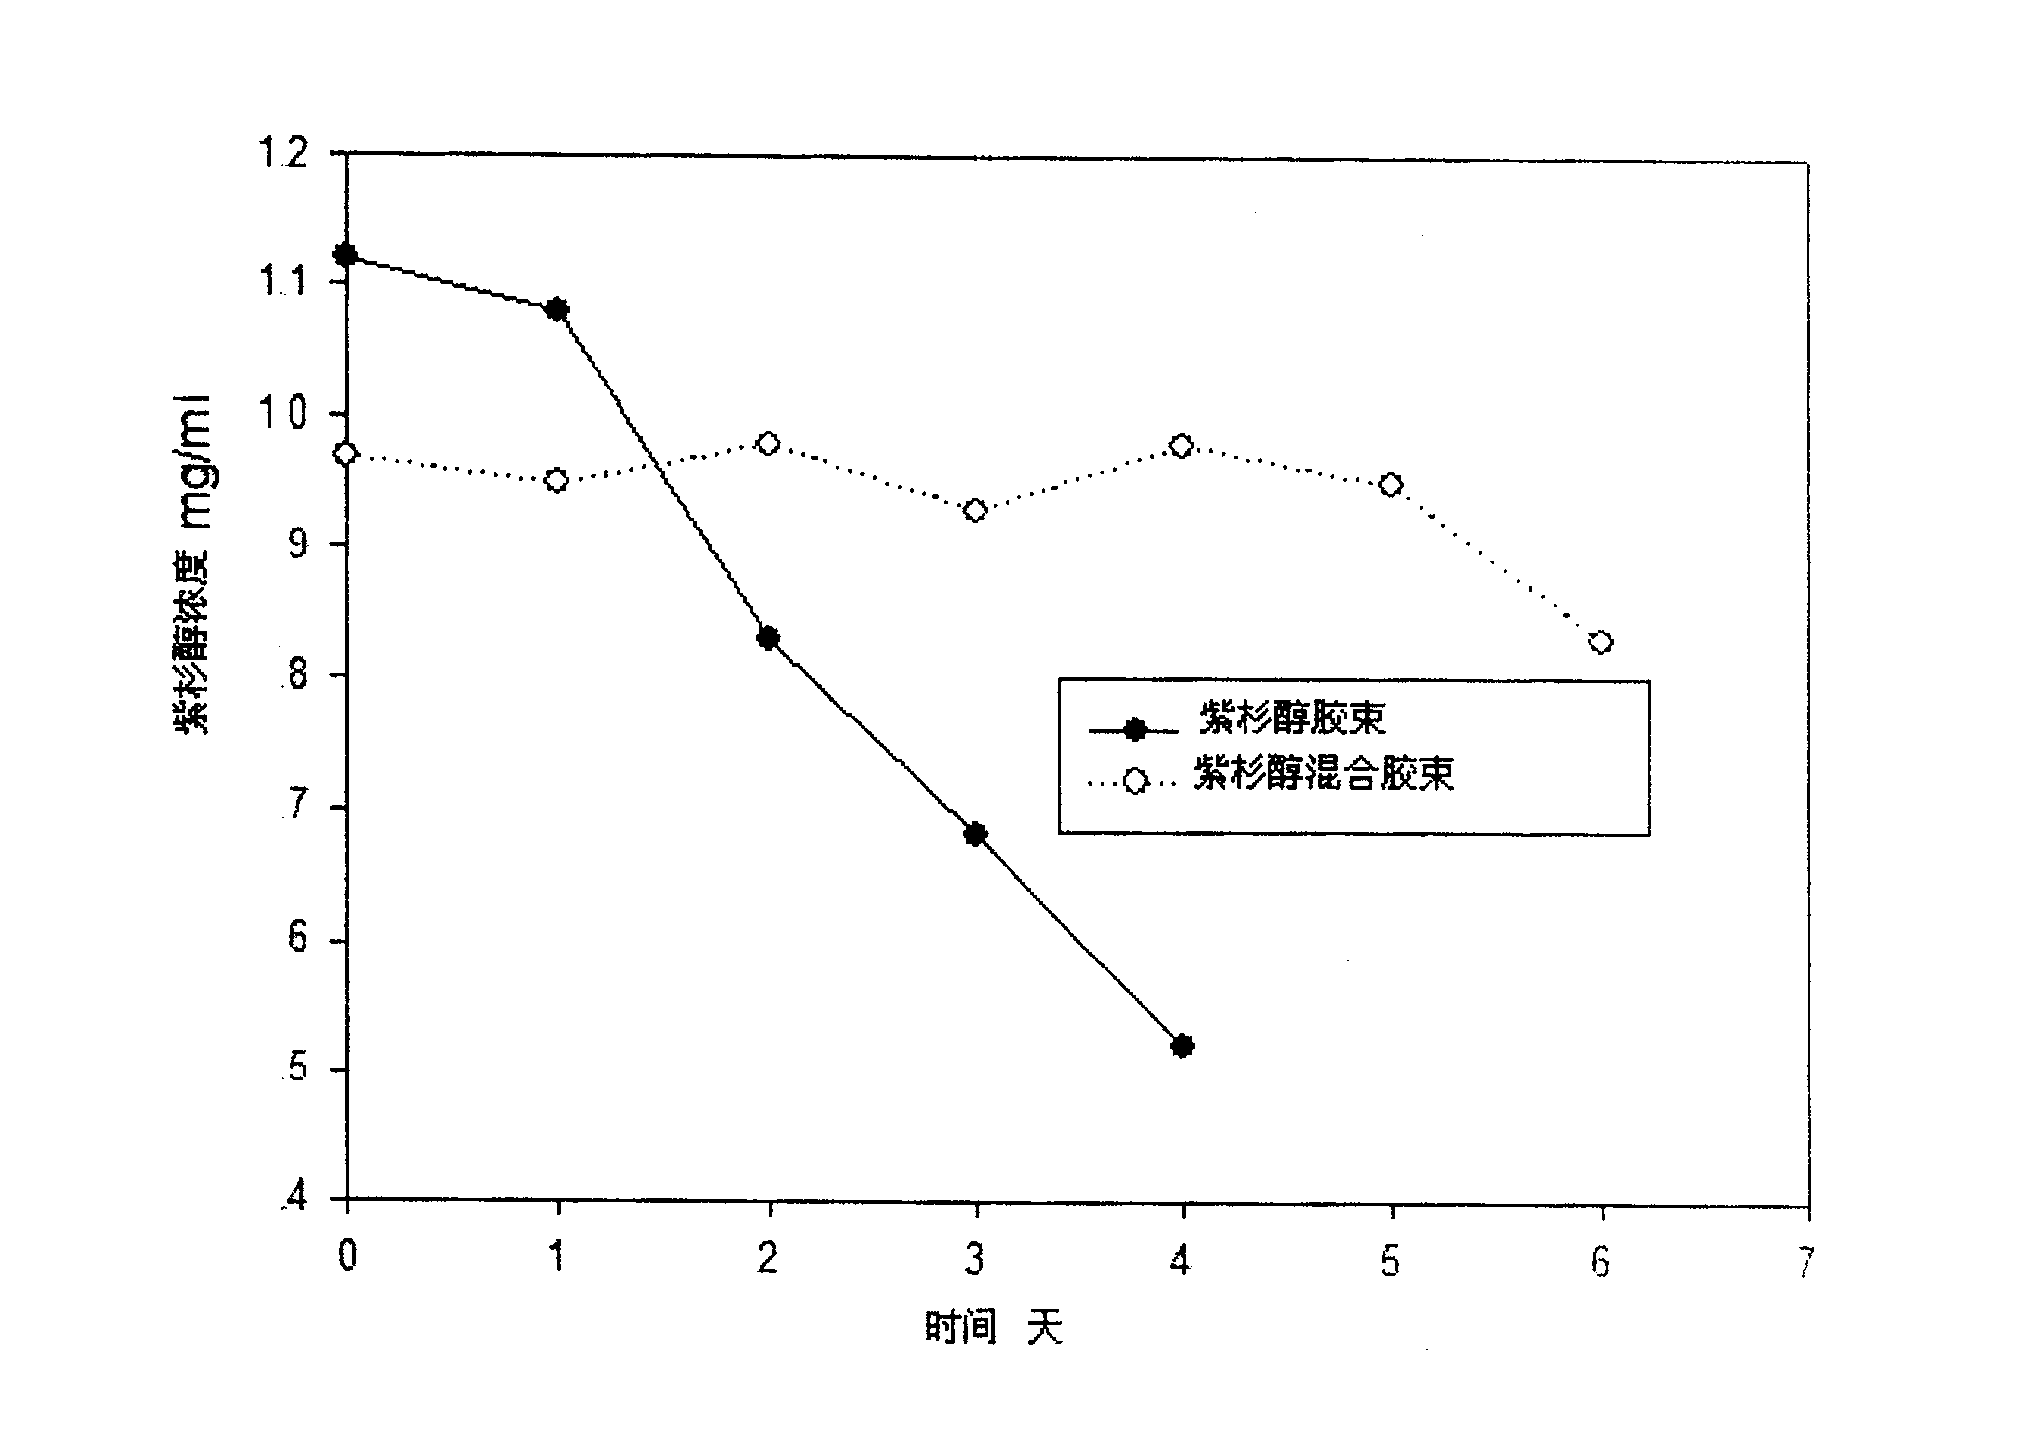 Stable polymer micelle medicine carrging system